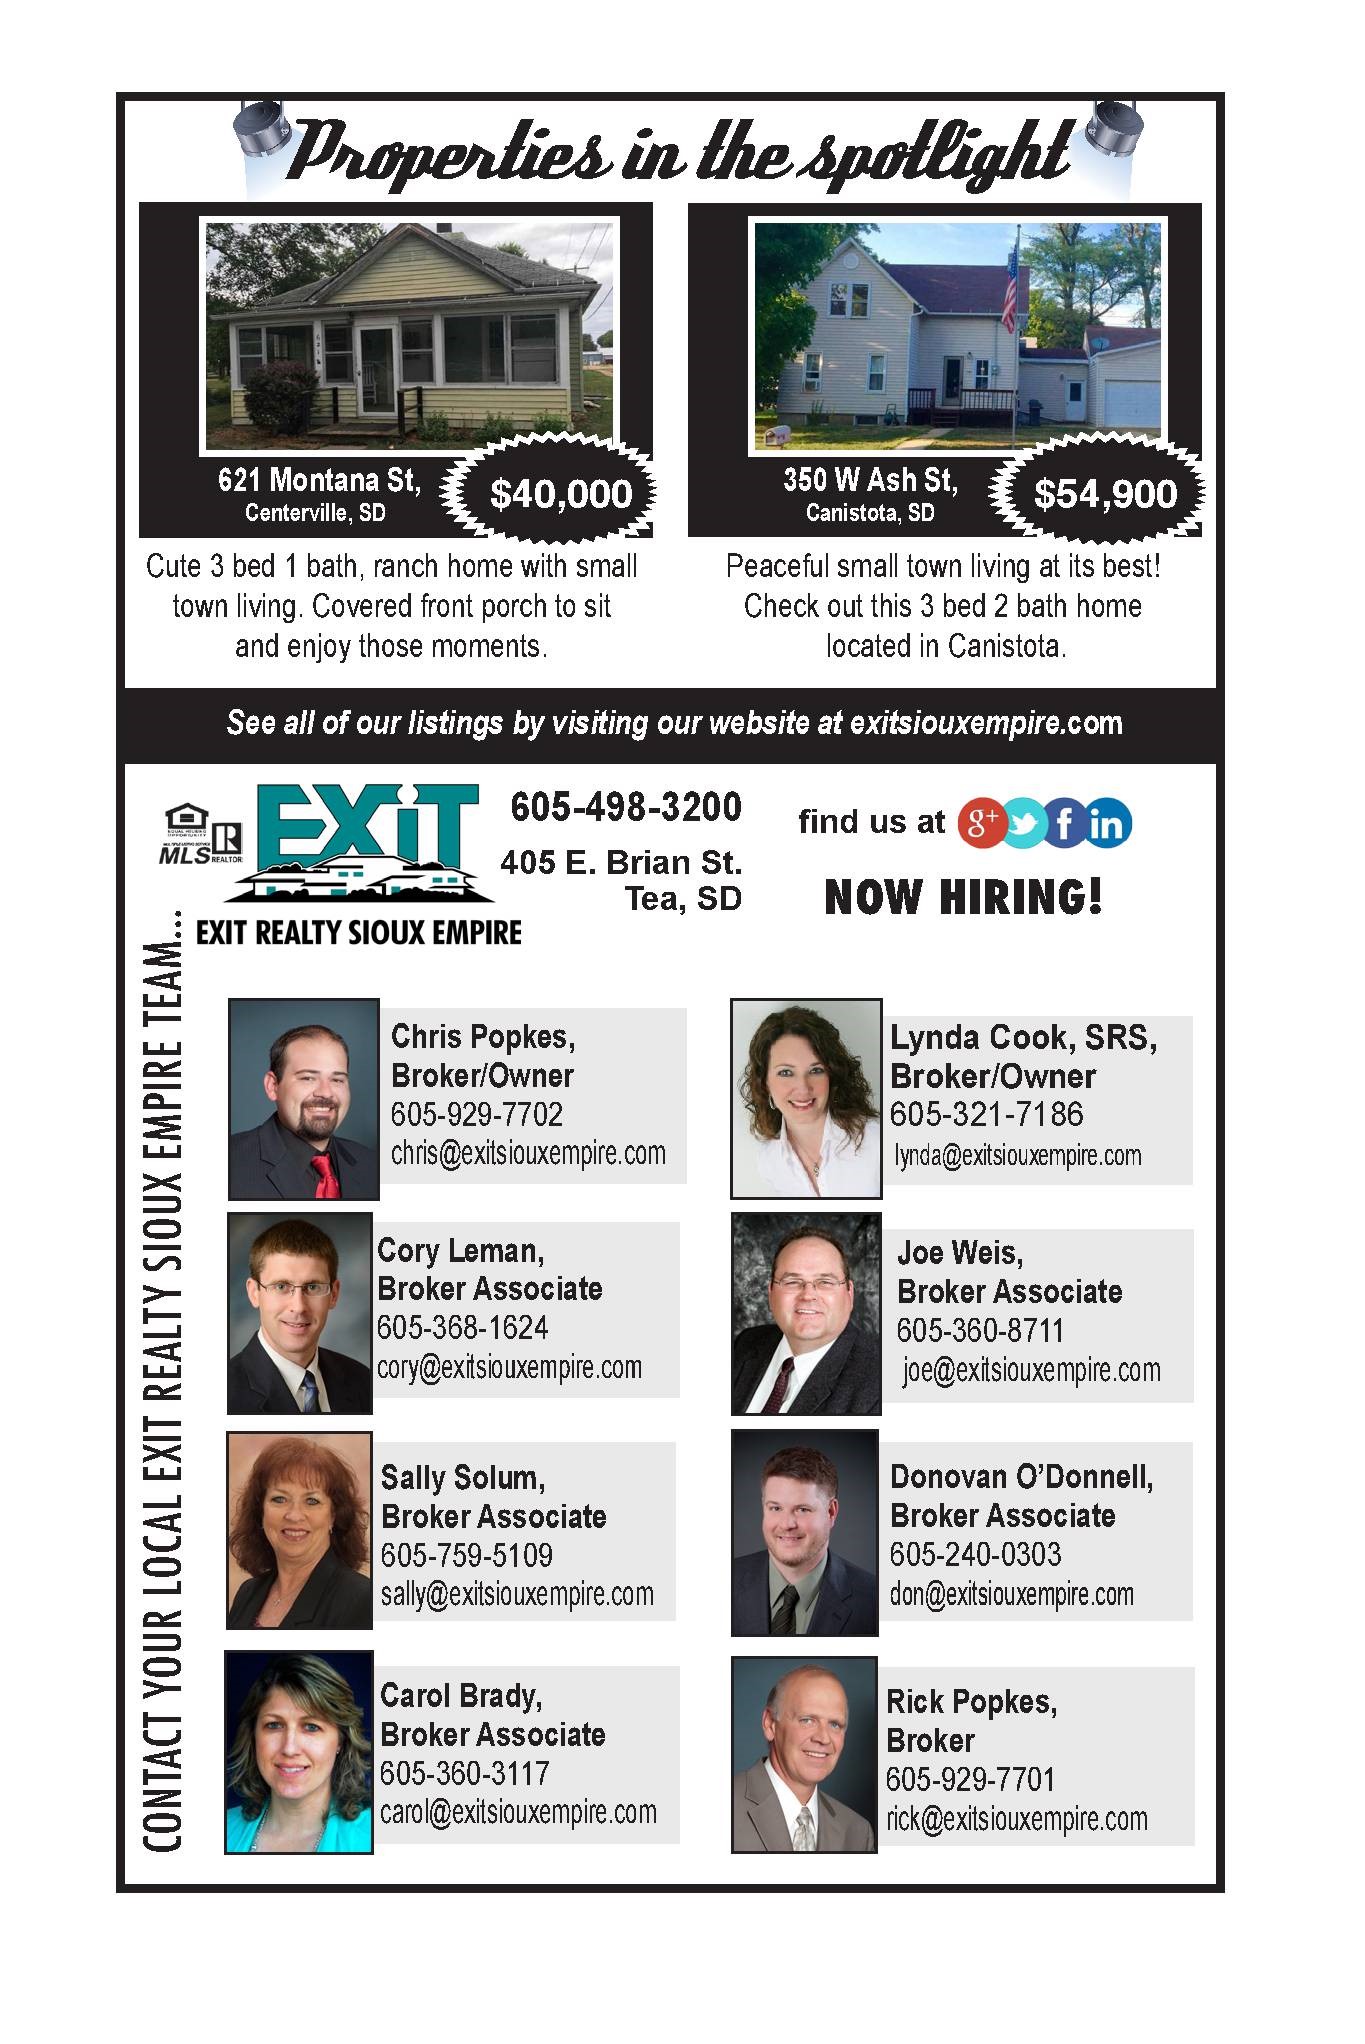 Sept. 29, 2016 EXIT Realty Sioux Empire's Newspaper ad!